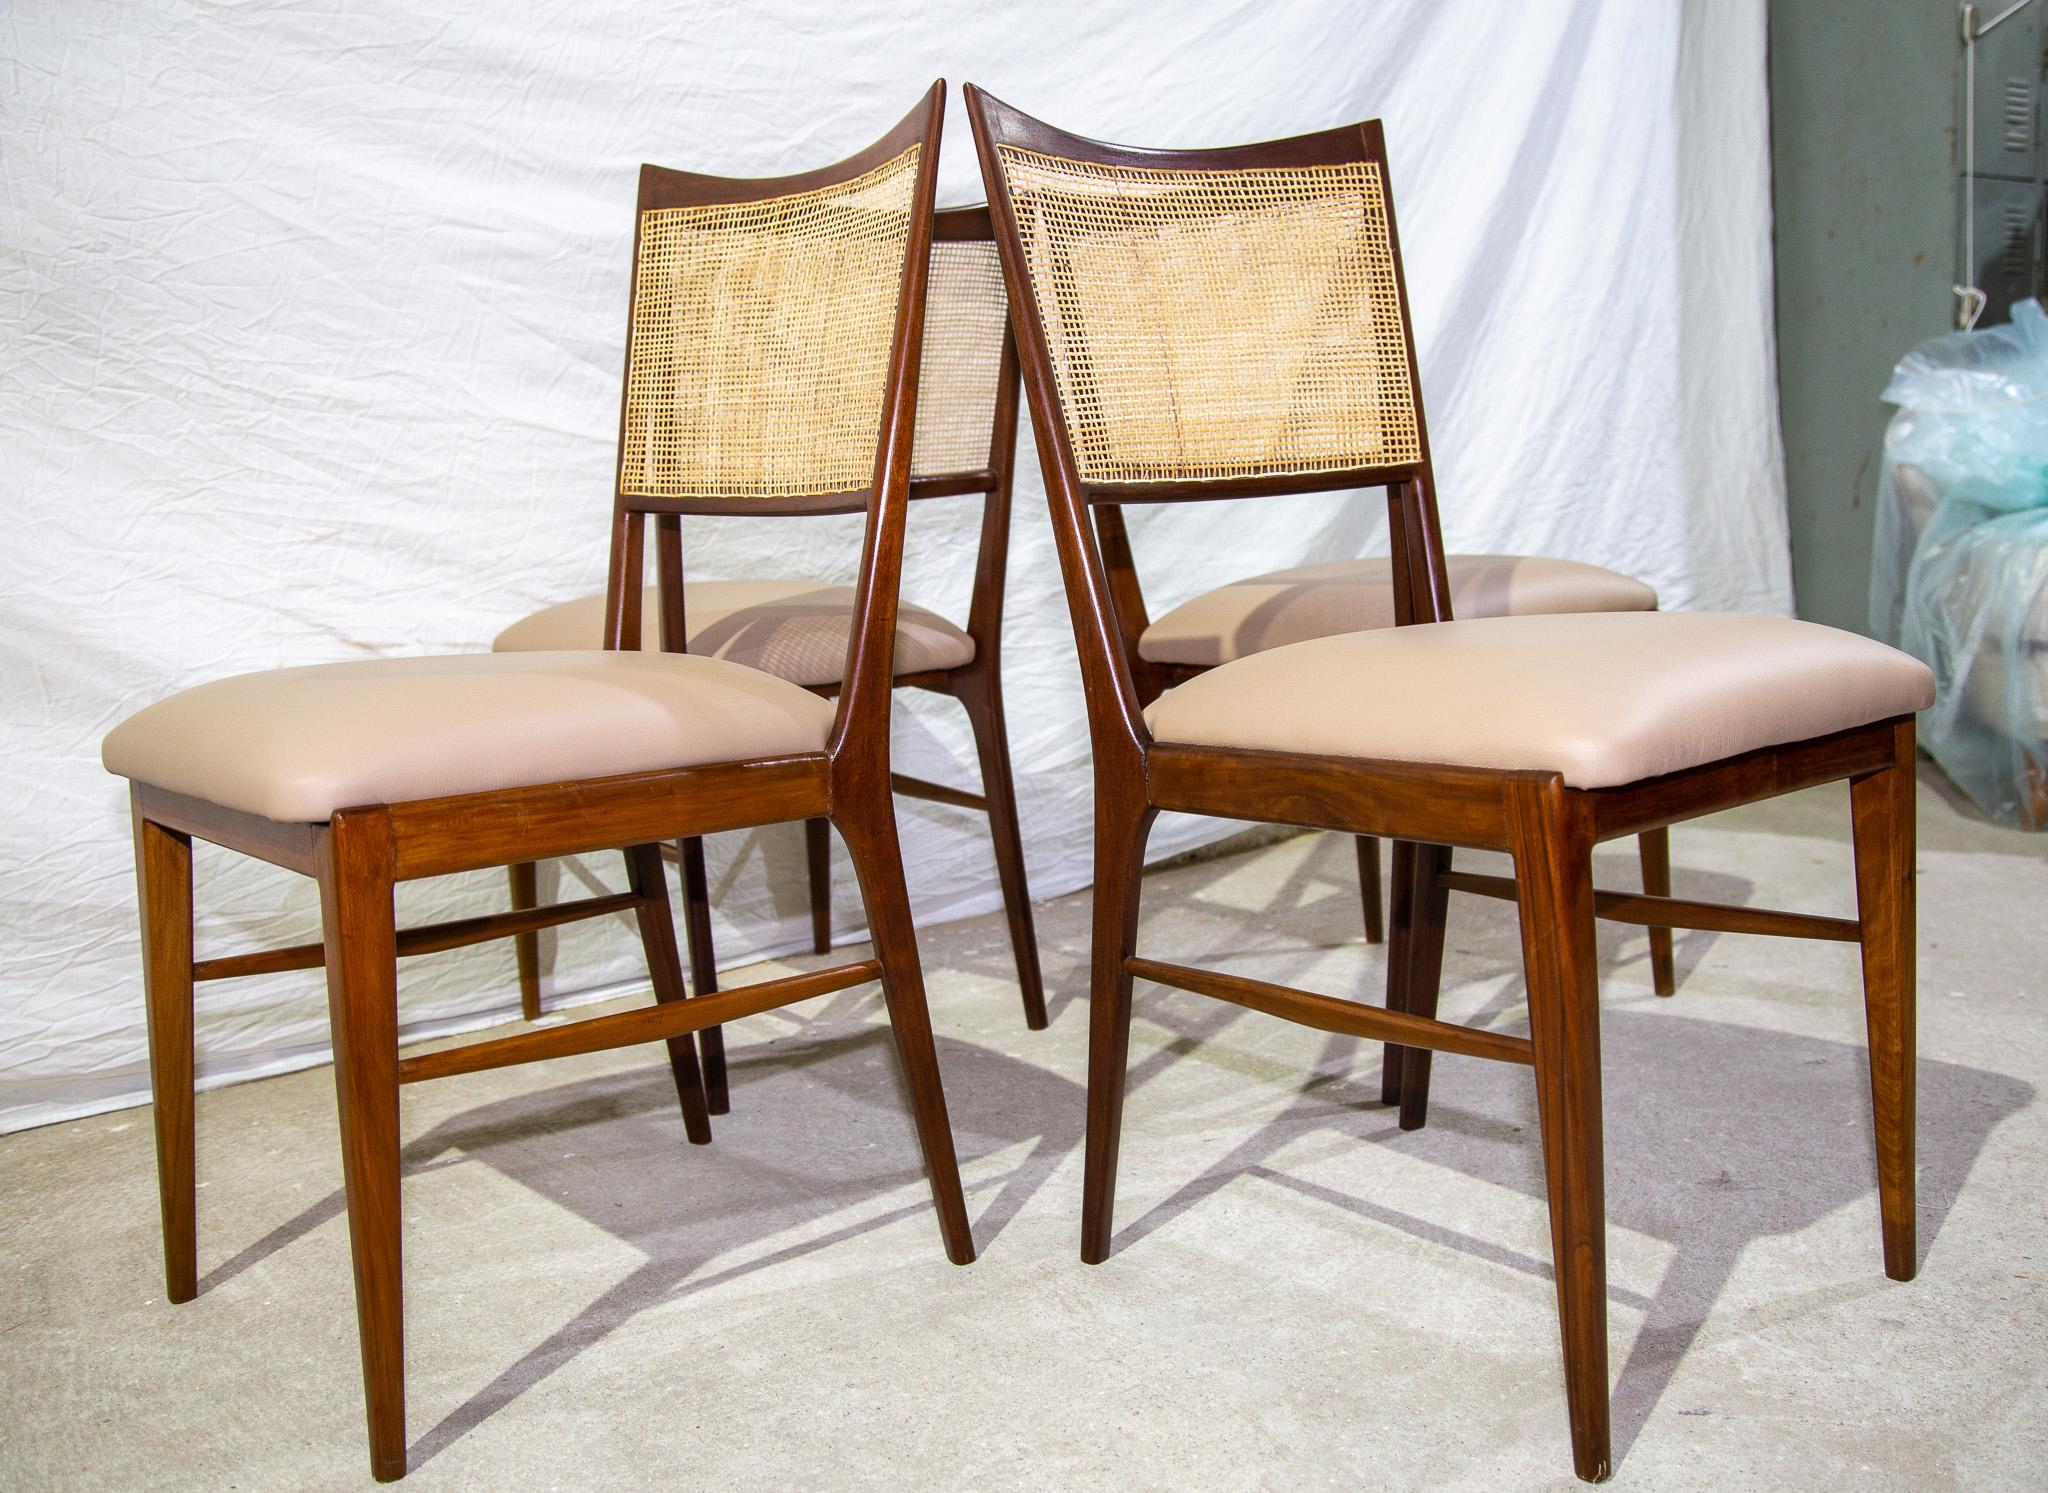 20th Century Brazilian Modern Set of Four Chairs in Hardwood & Beige Leather, Unknown, 1960s